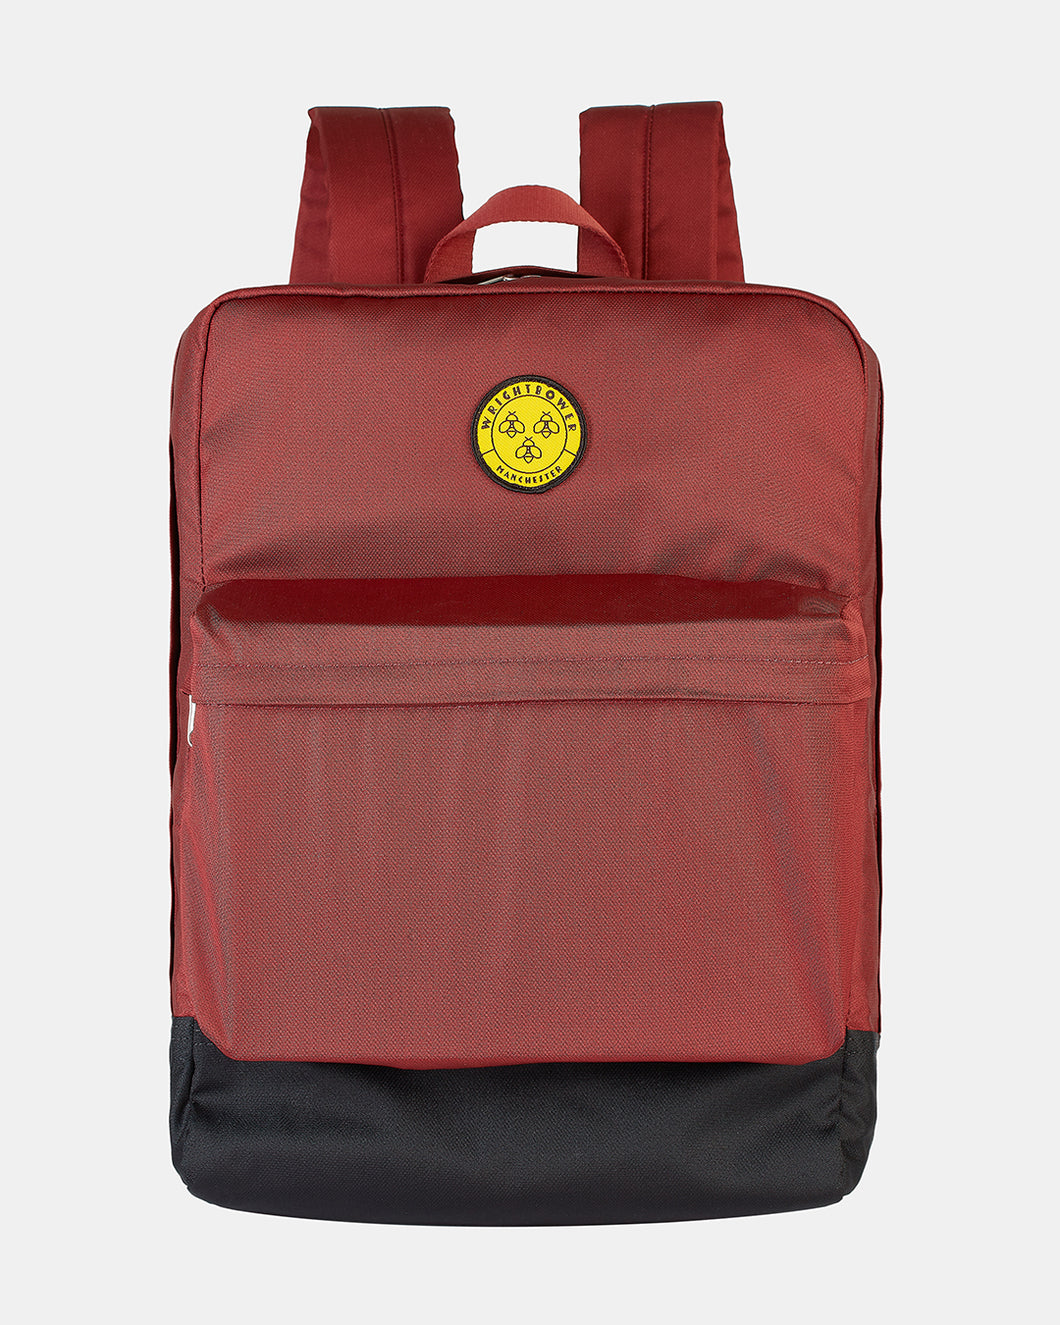 RIO - Classic Backpack in RUST RED TWO TONE